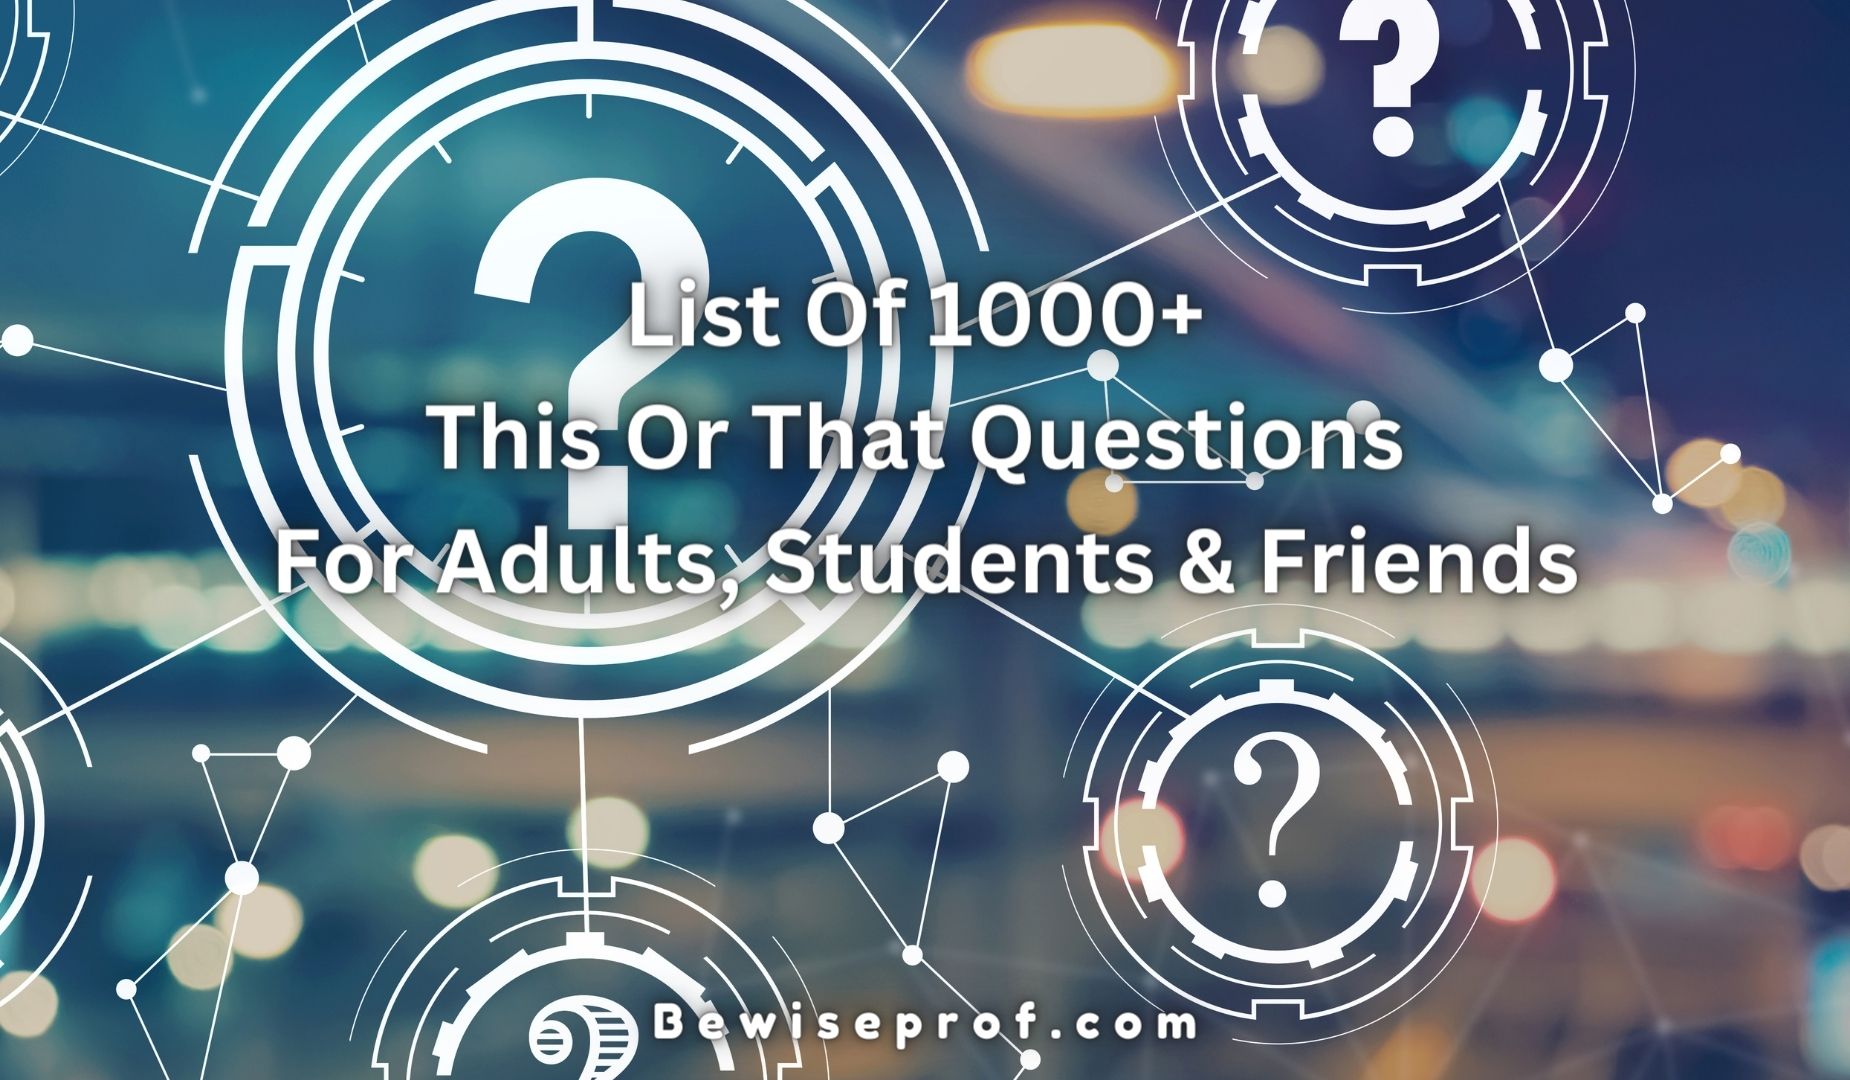 List Of 1000+ This Or That Questions For Adults, Students & Friends